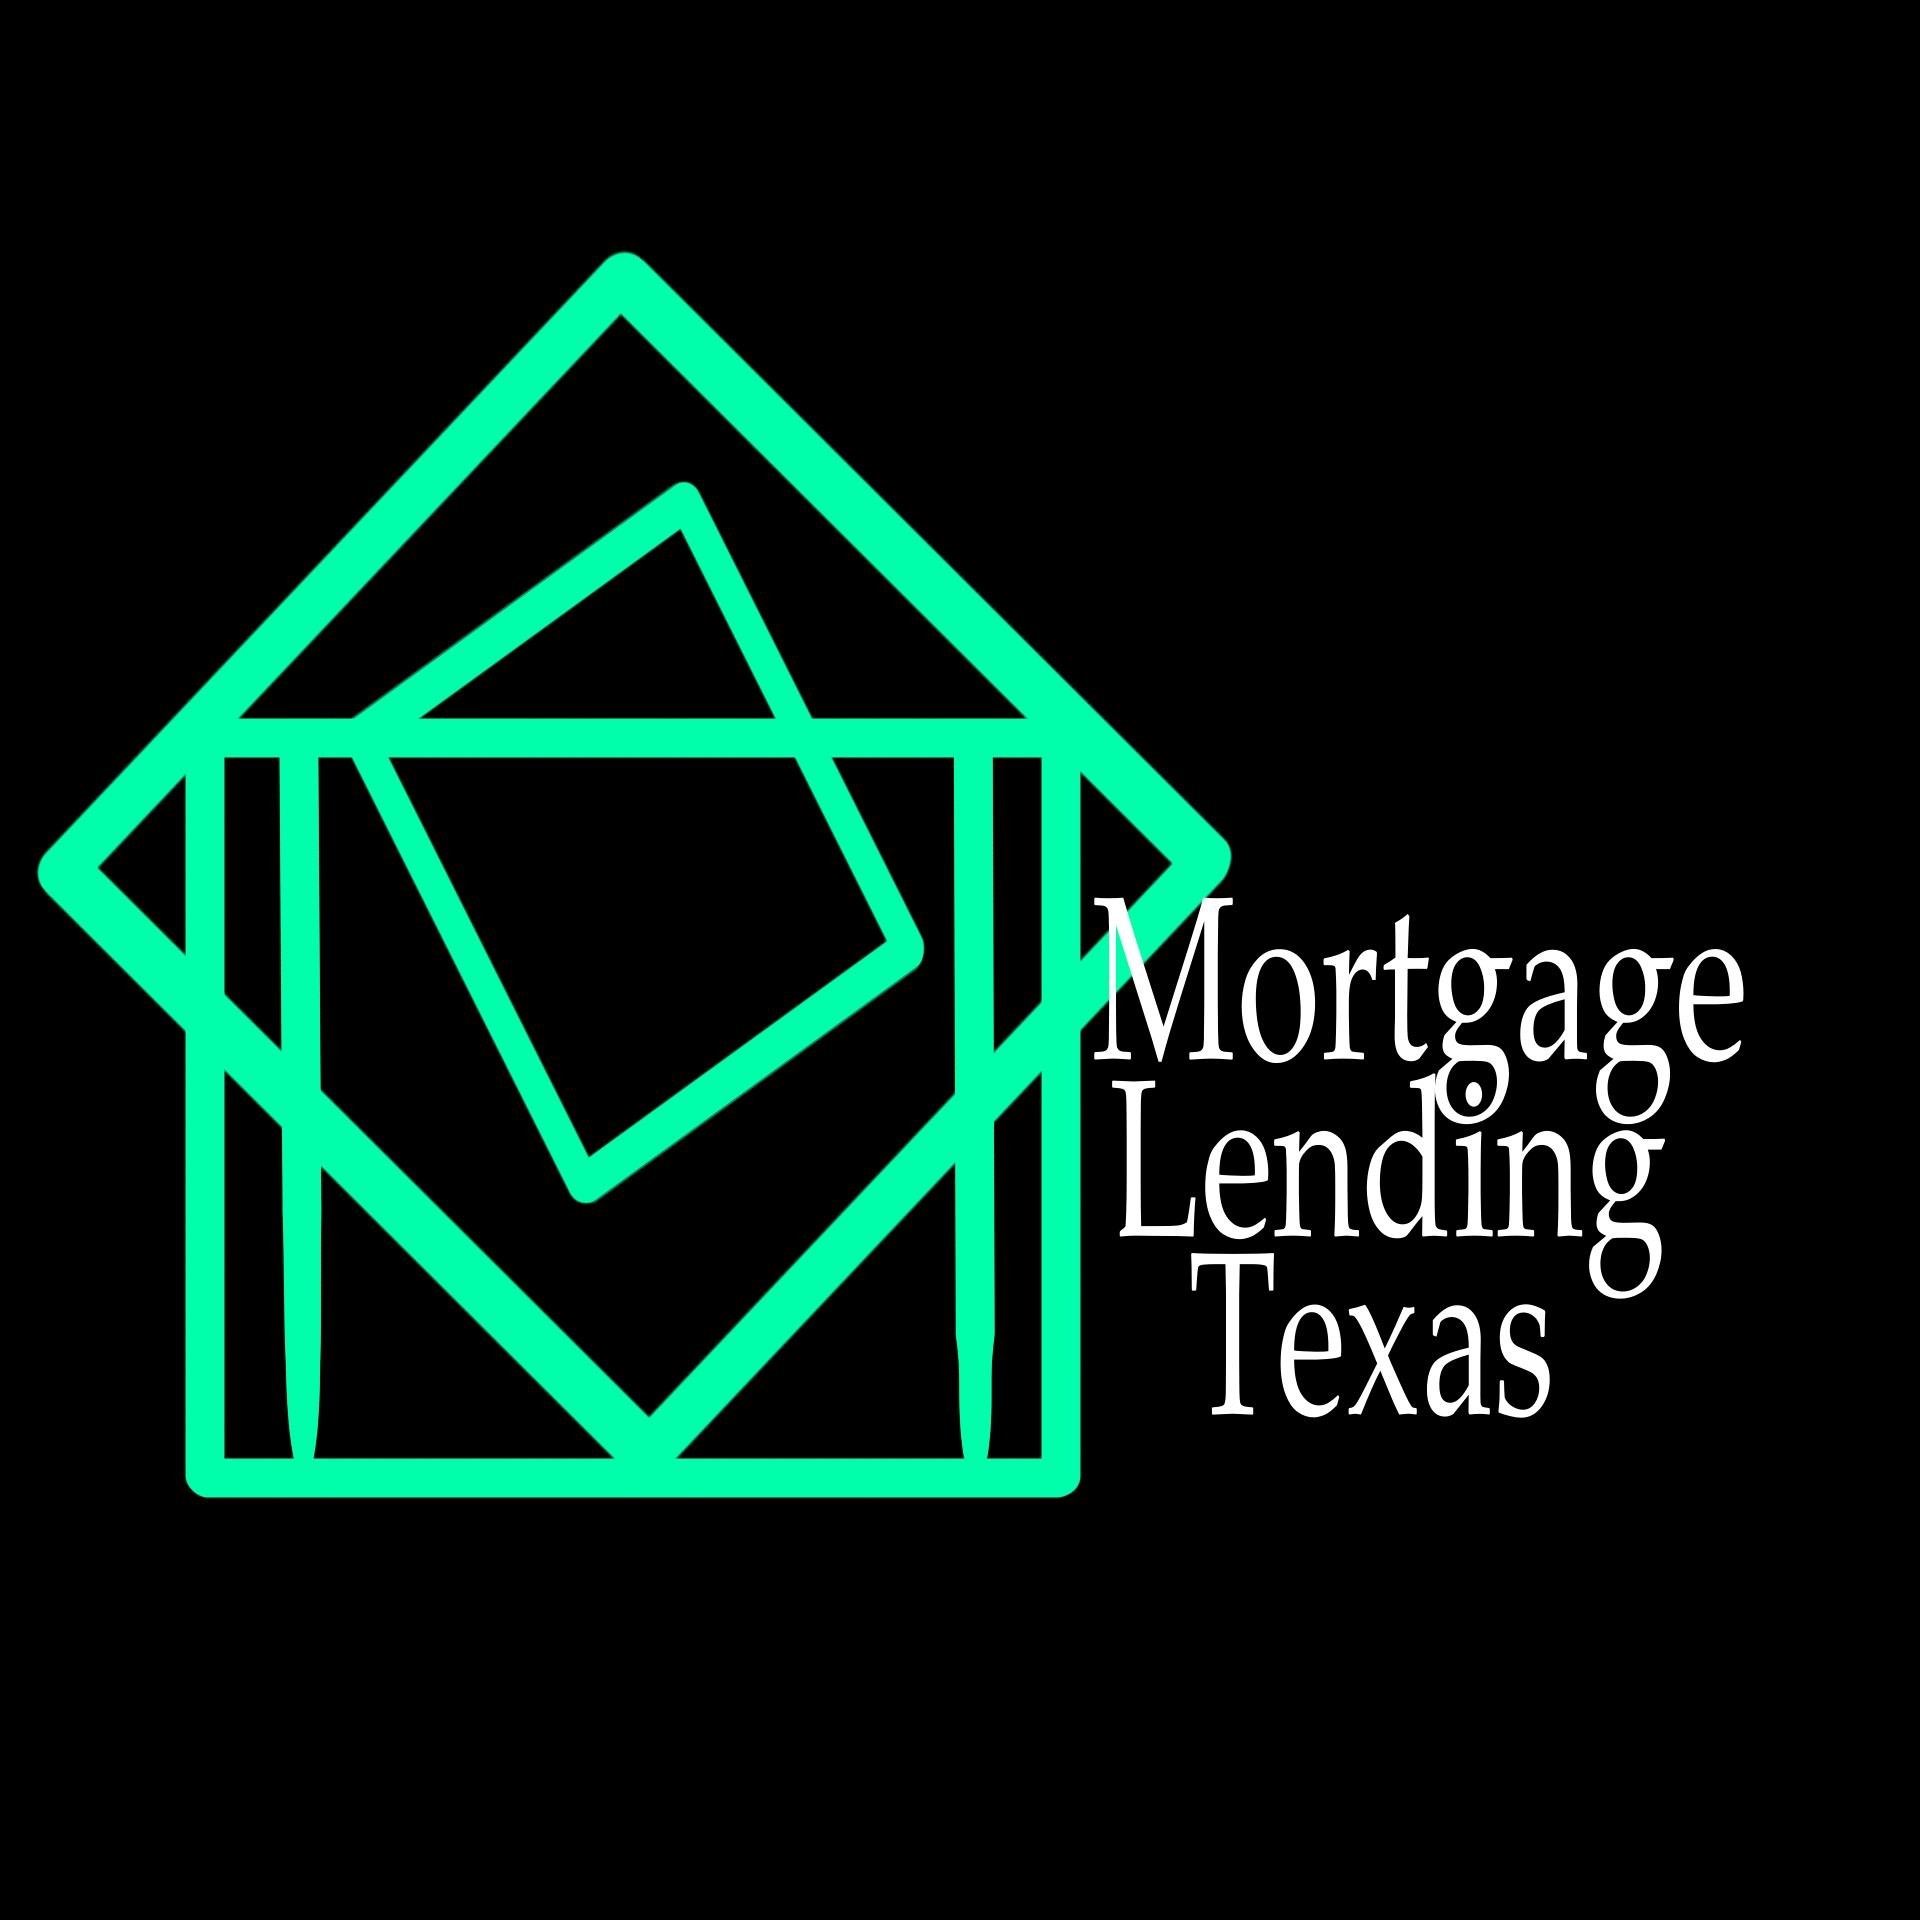 Mortgage Lending Texas in Fort worth's Logo